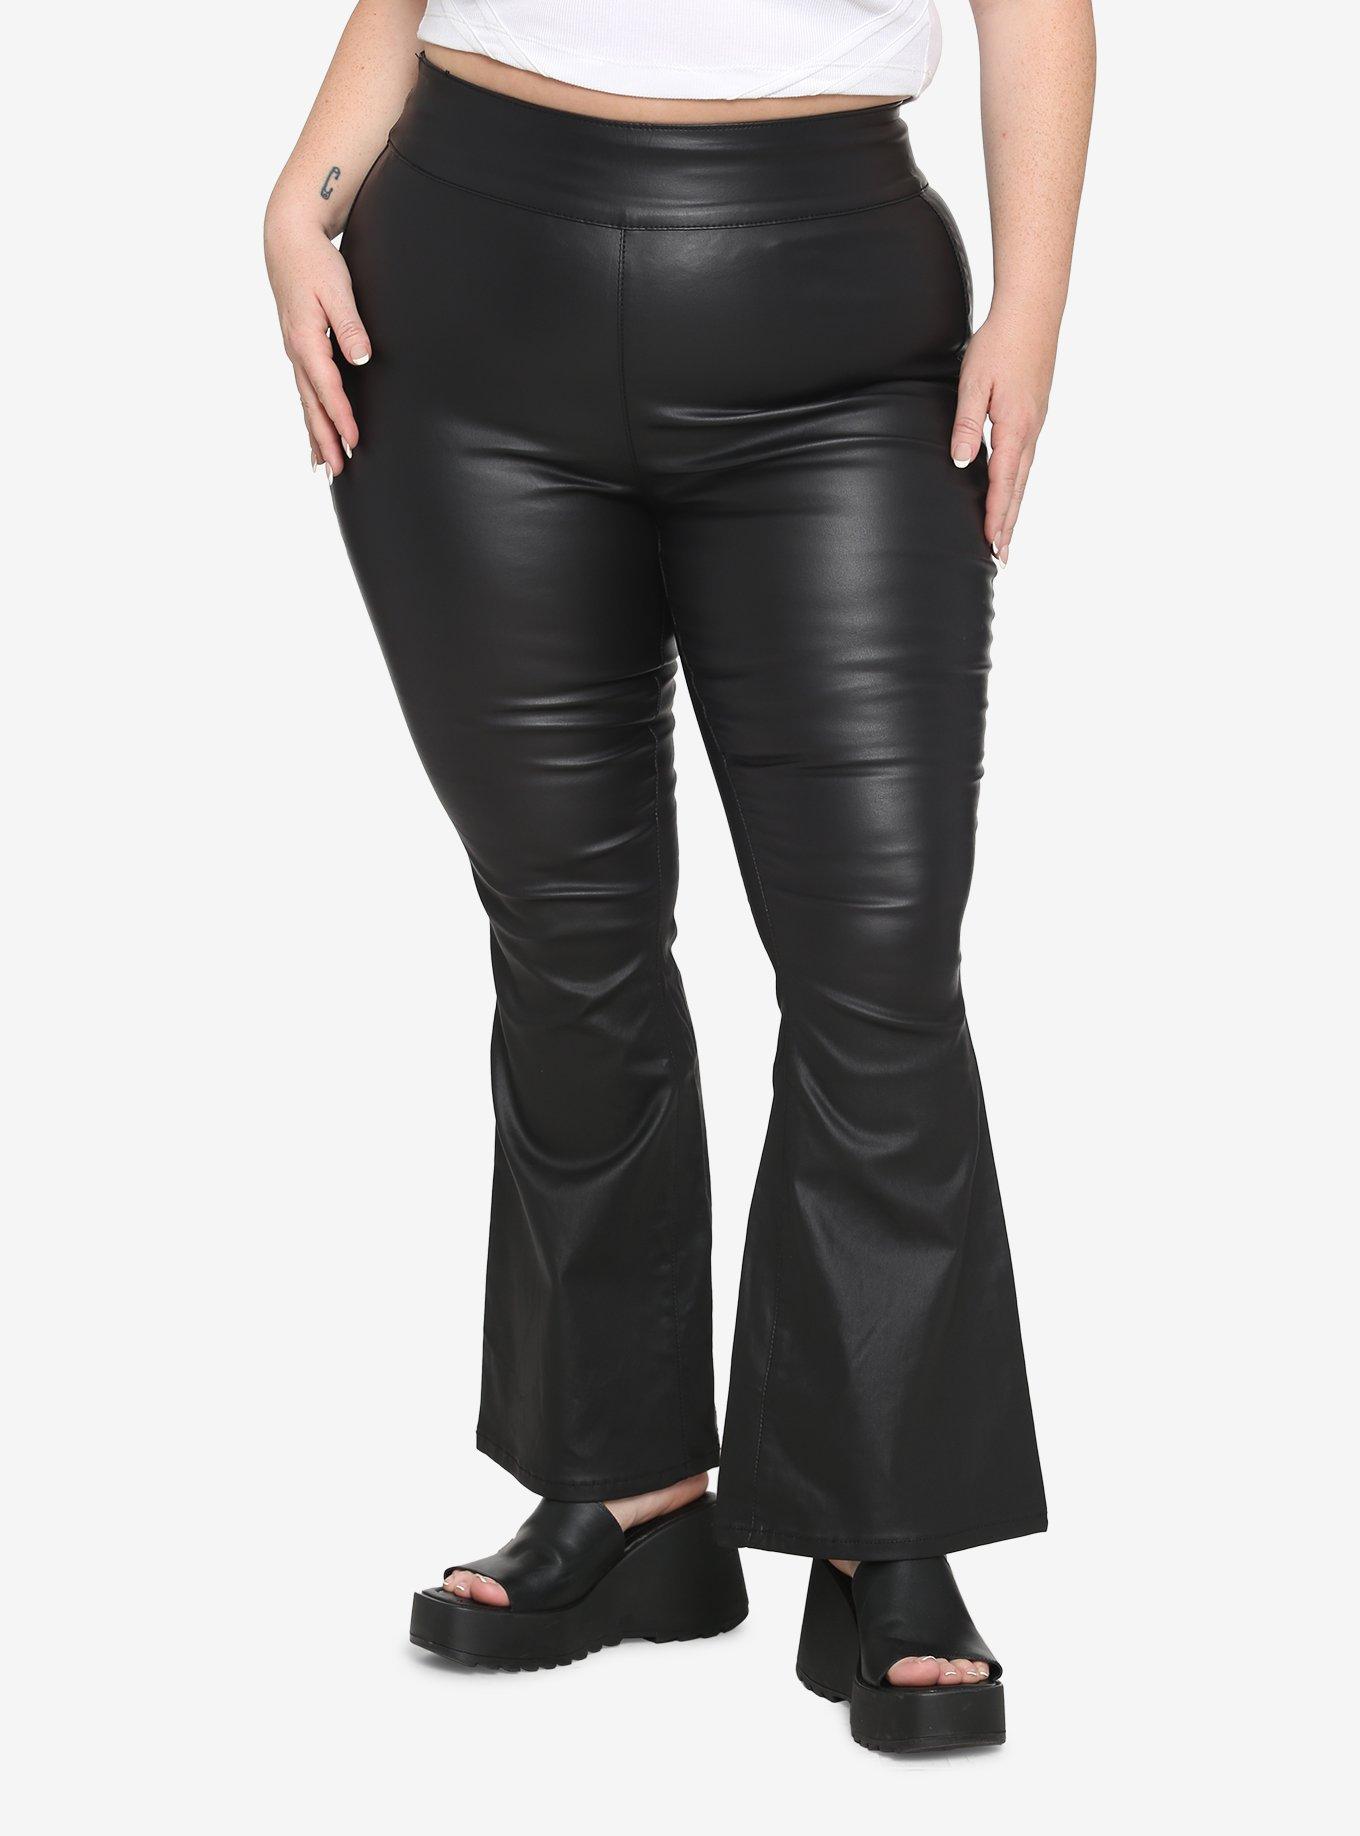 LIMITED COLLECTION Plus Size Black Faux Leather Flared Trousers